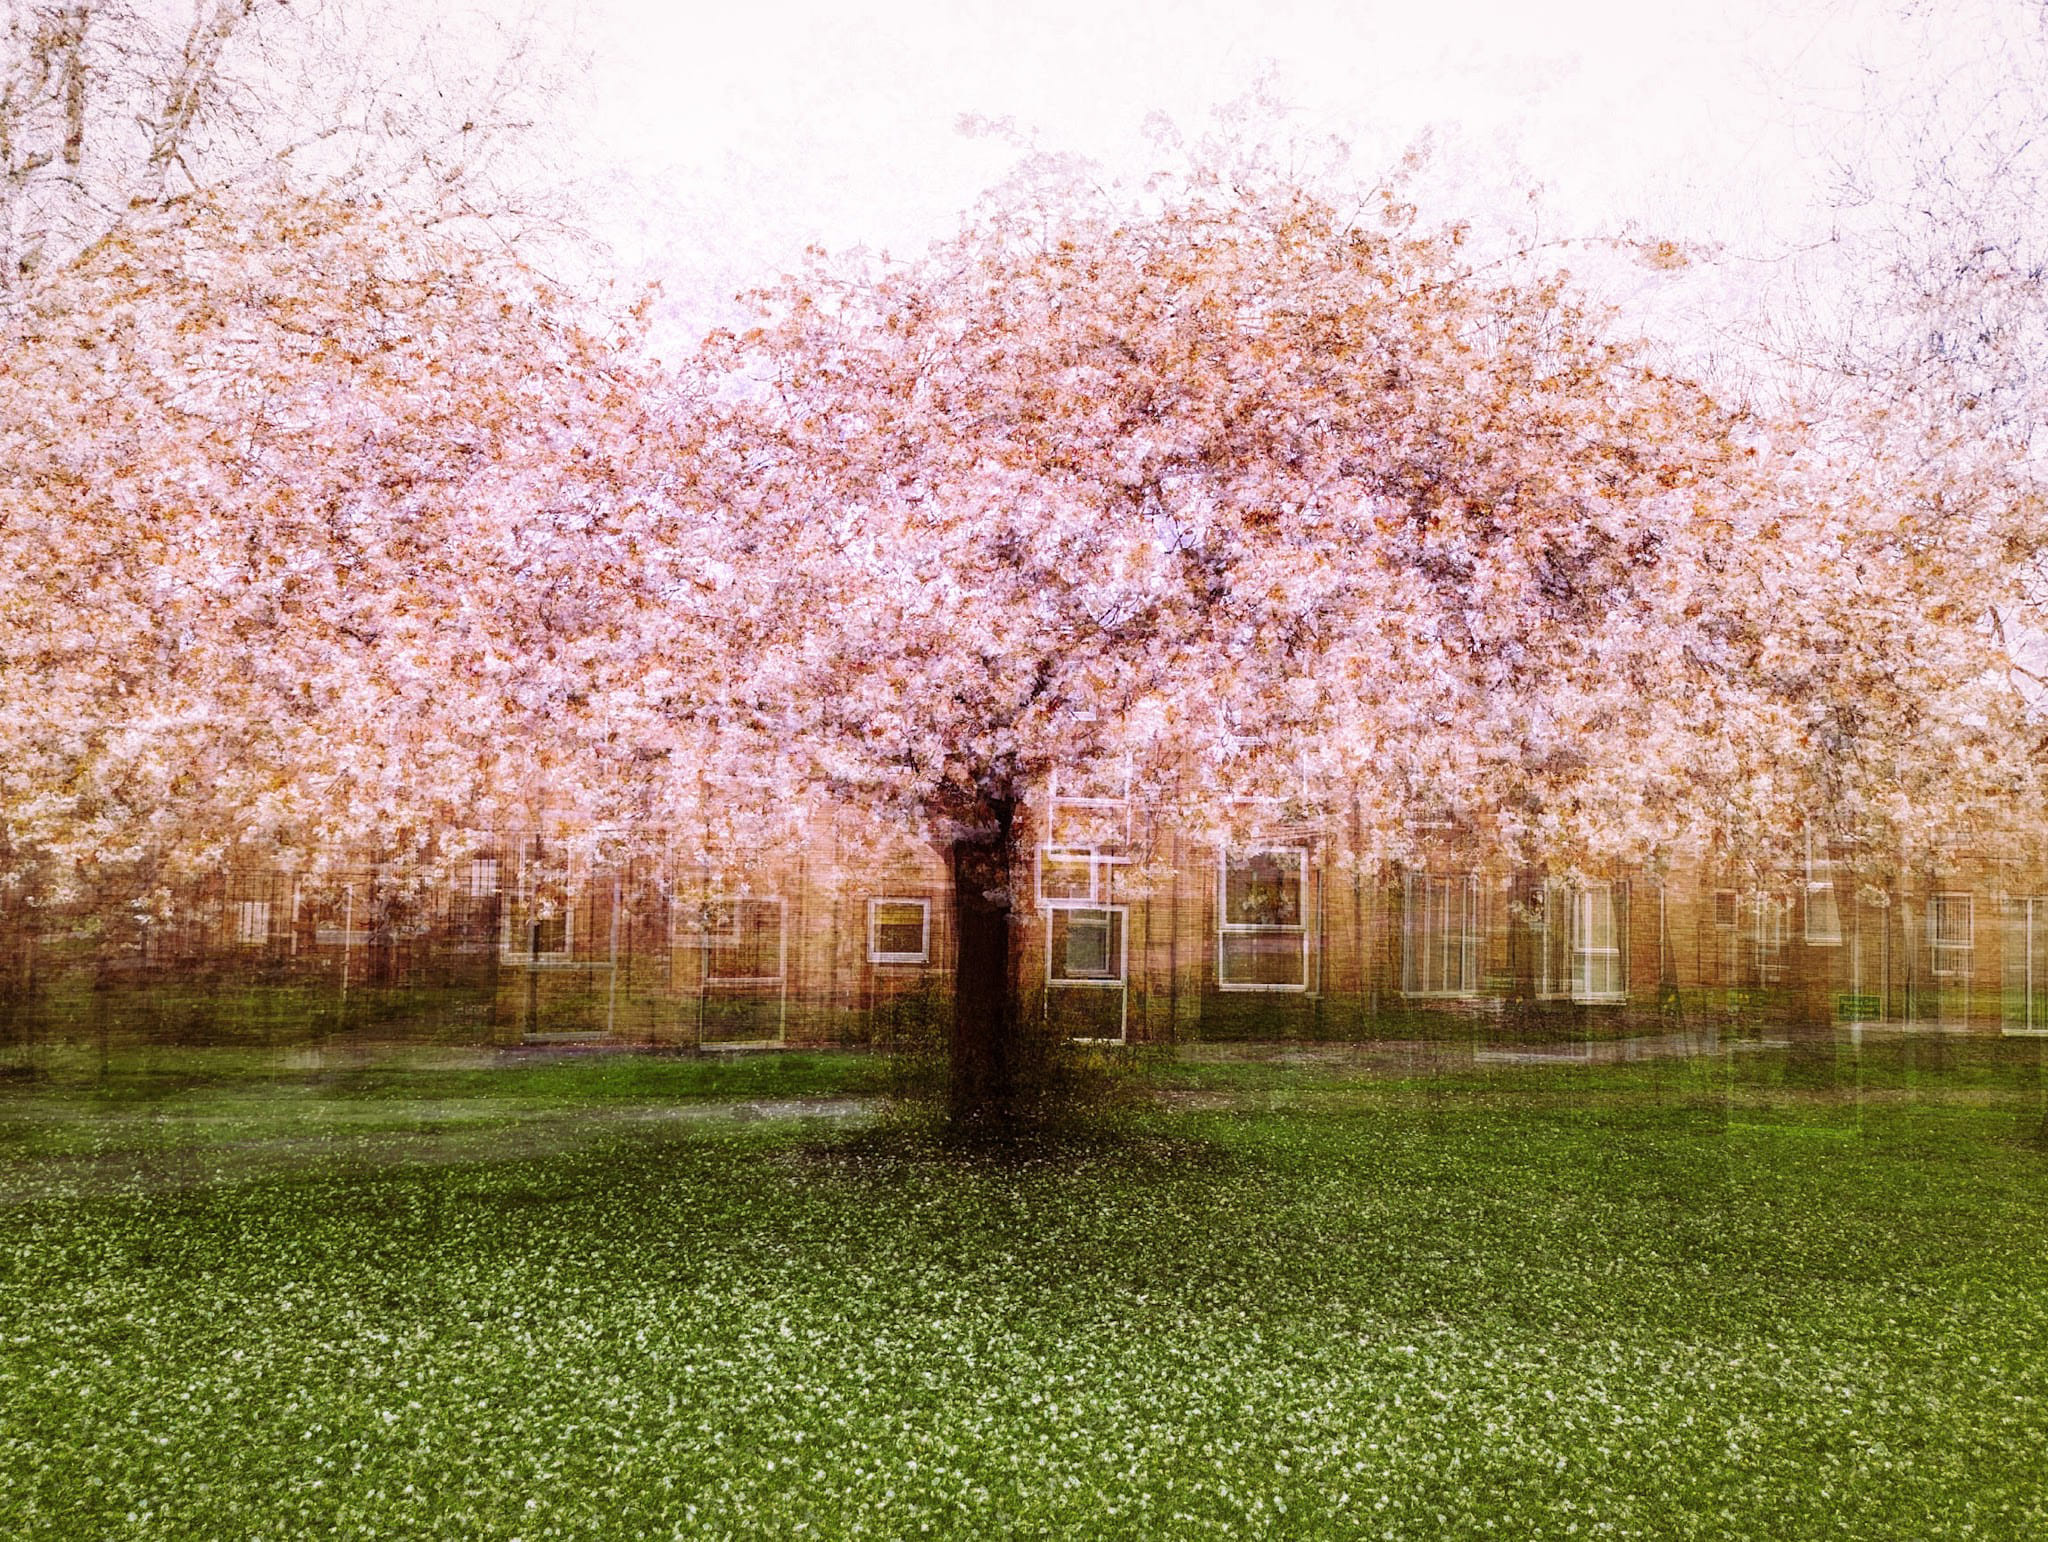 an mpressionistic multiple exposure of a blossom tree